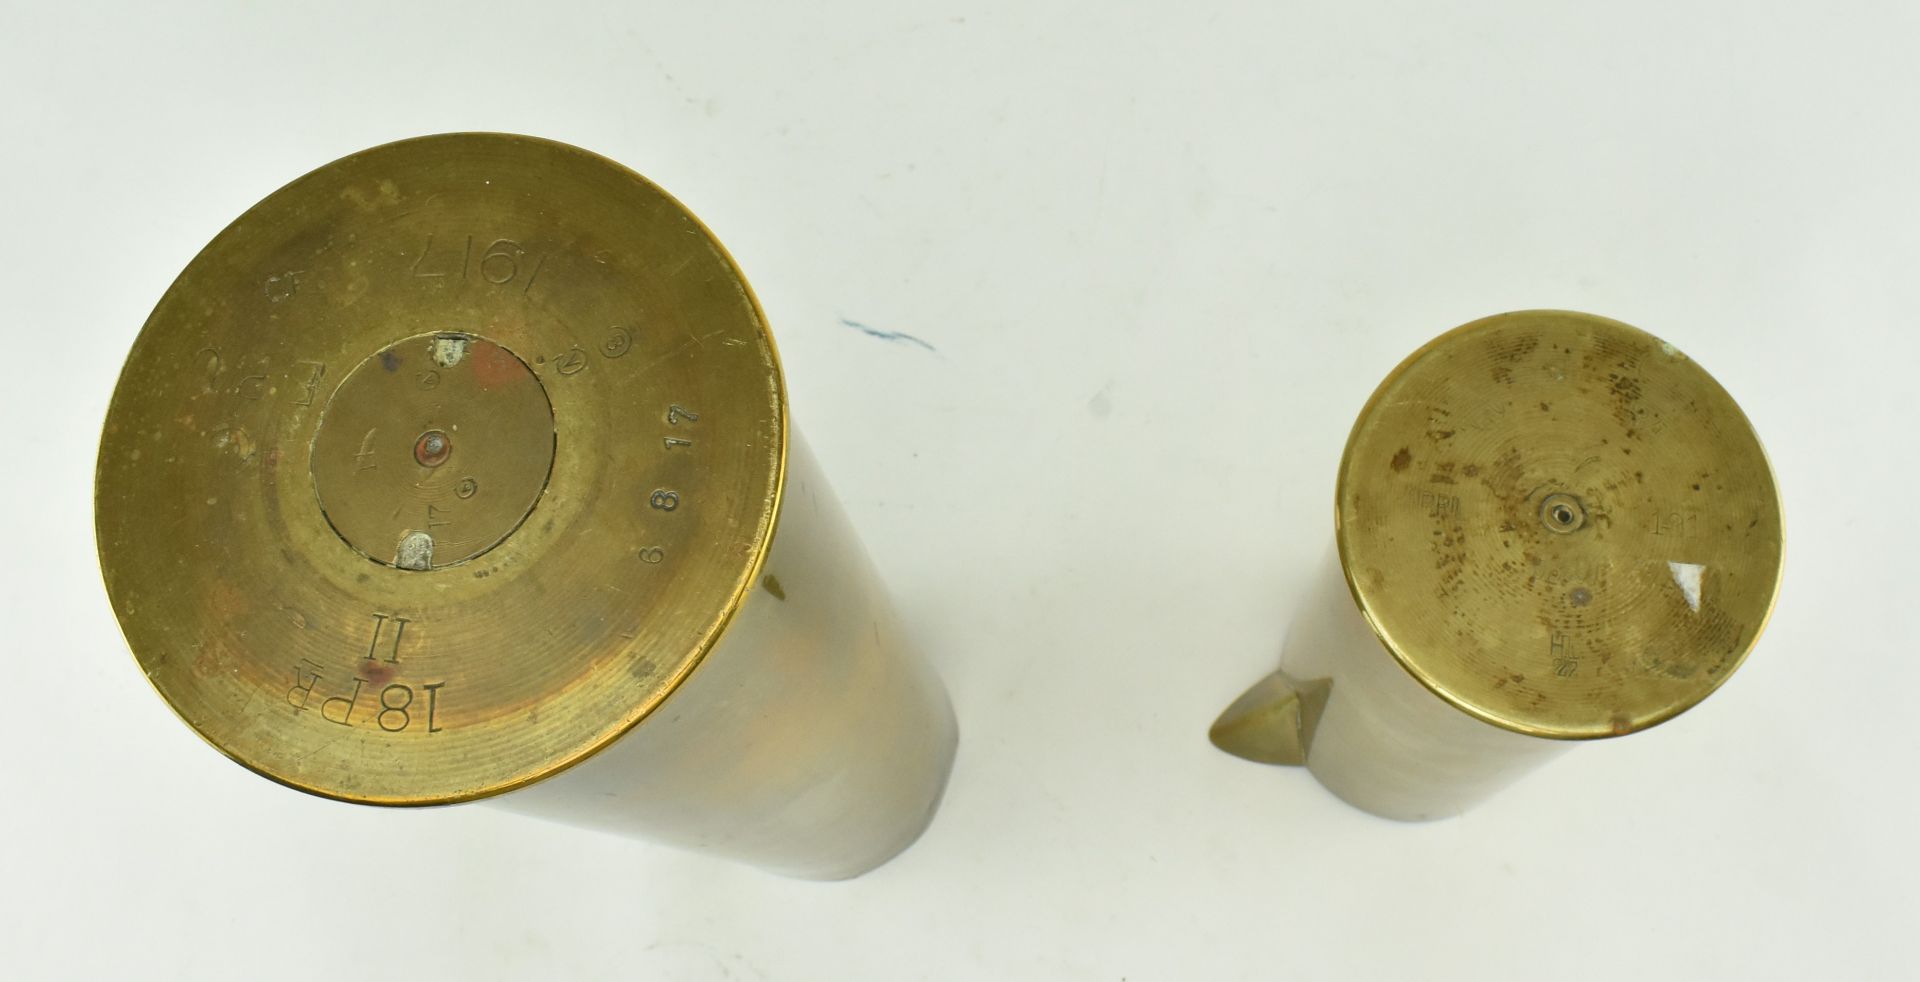 TRENCH ART - COLLECTION OF SIX WWI REPURPOSED ARTILLERY SHELL - Image 9 of 9